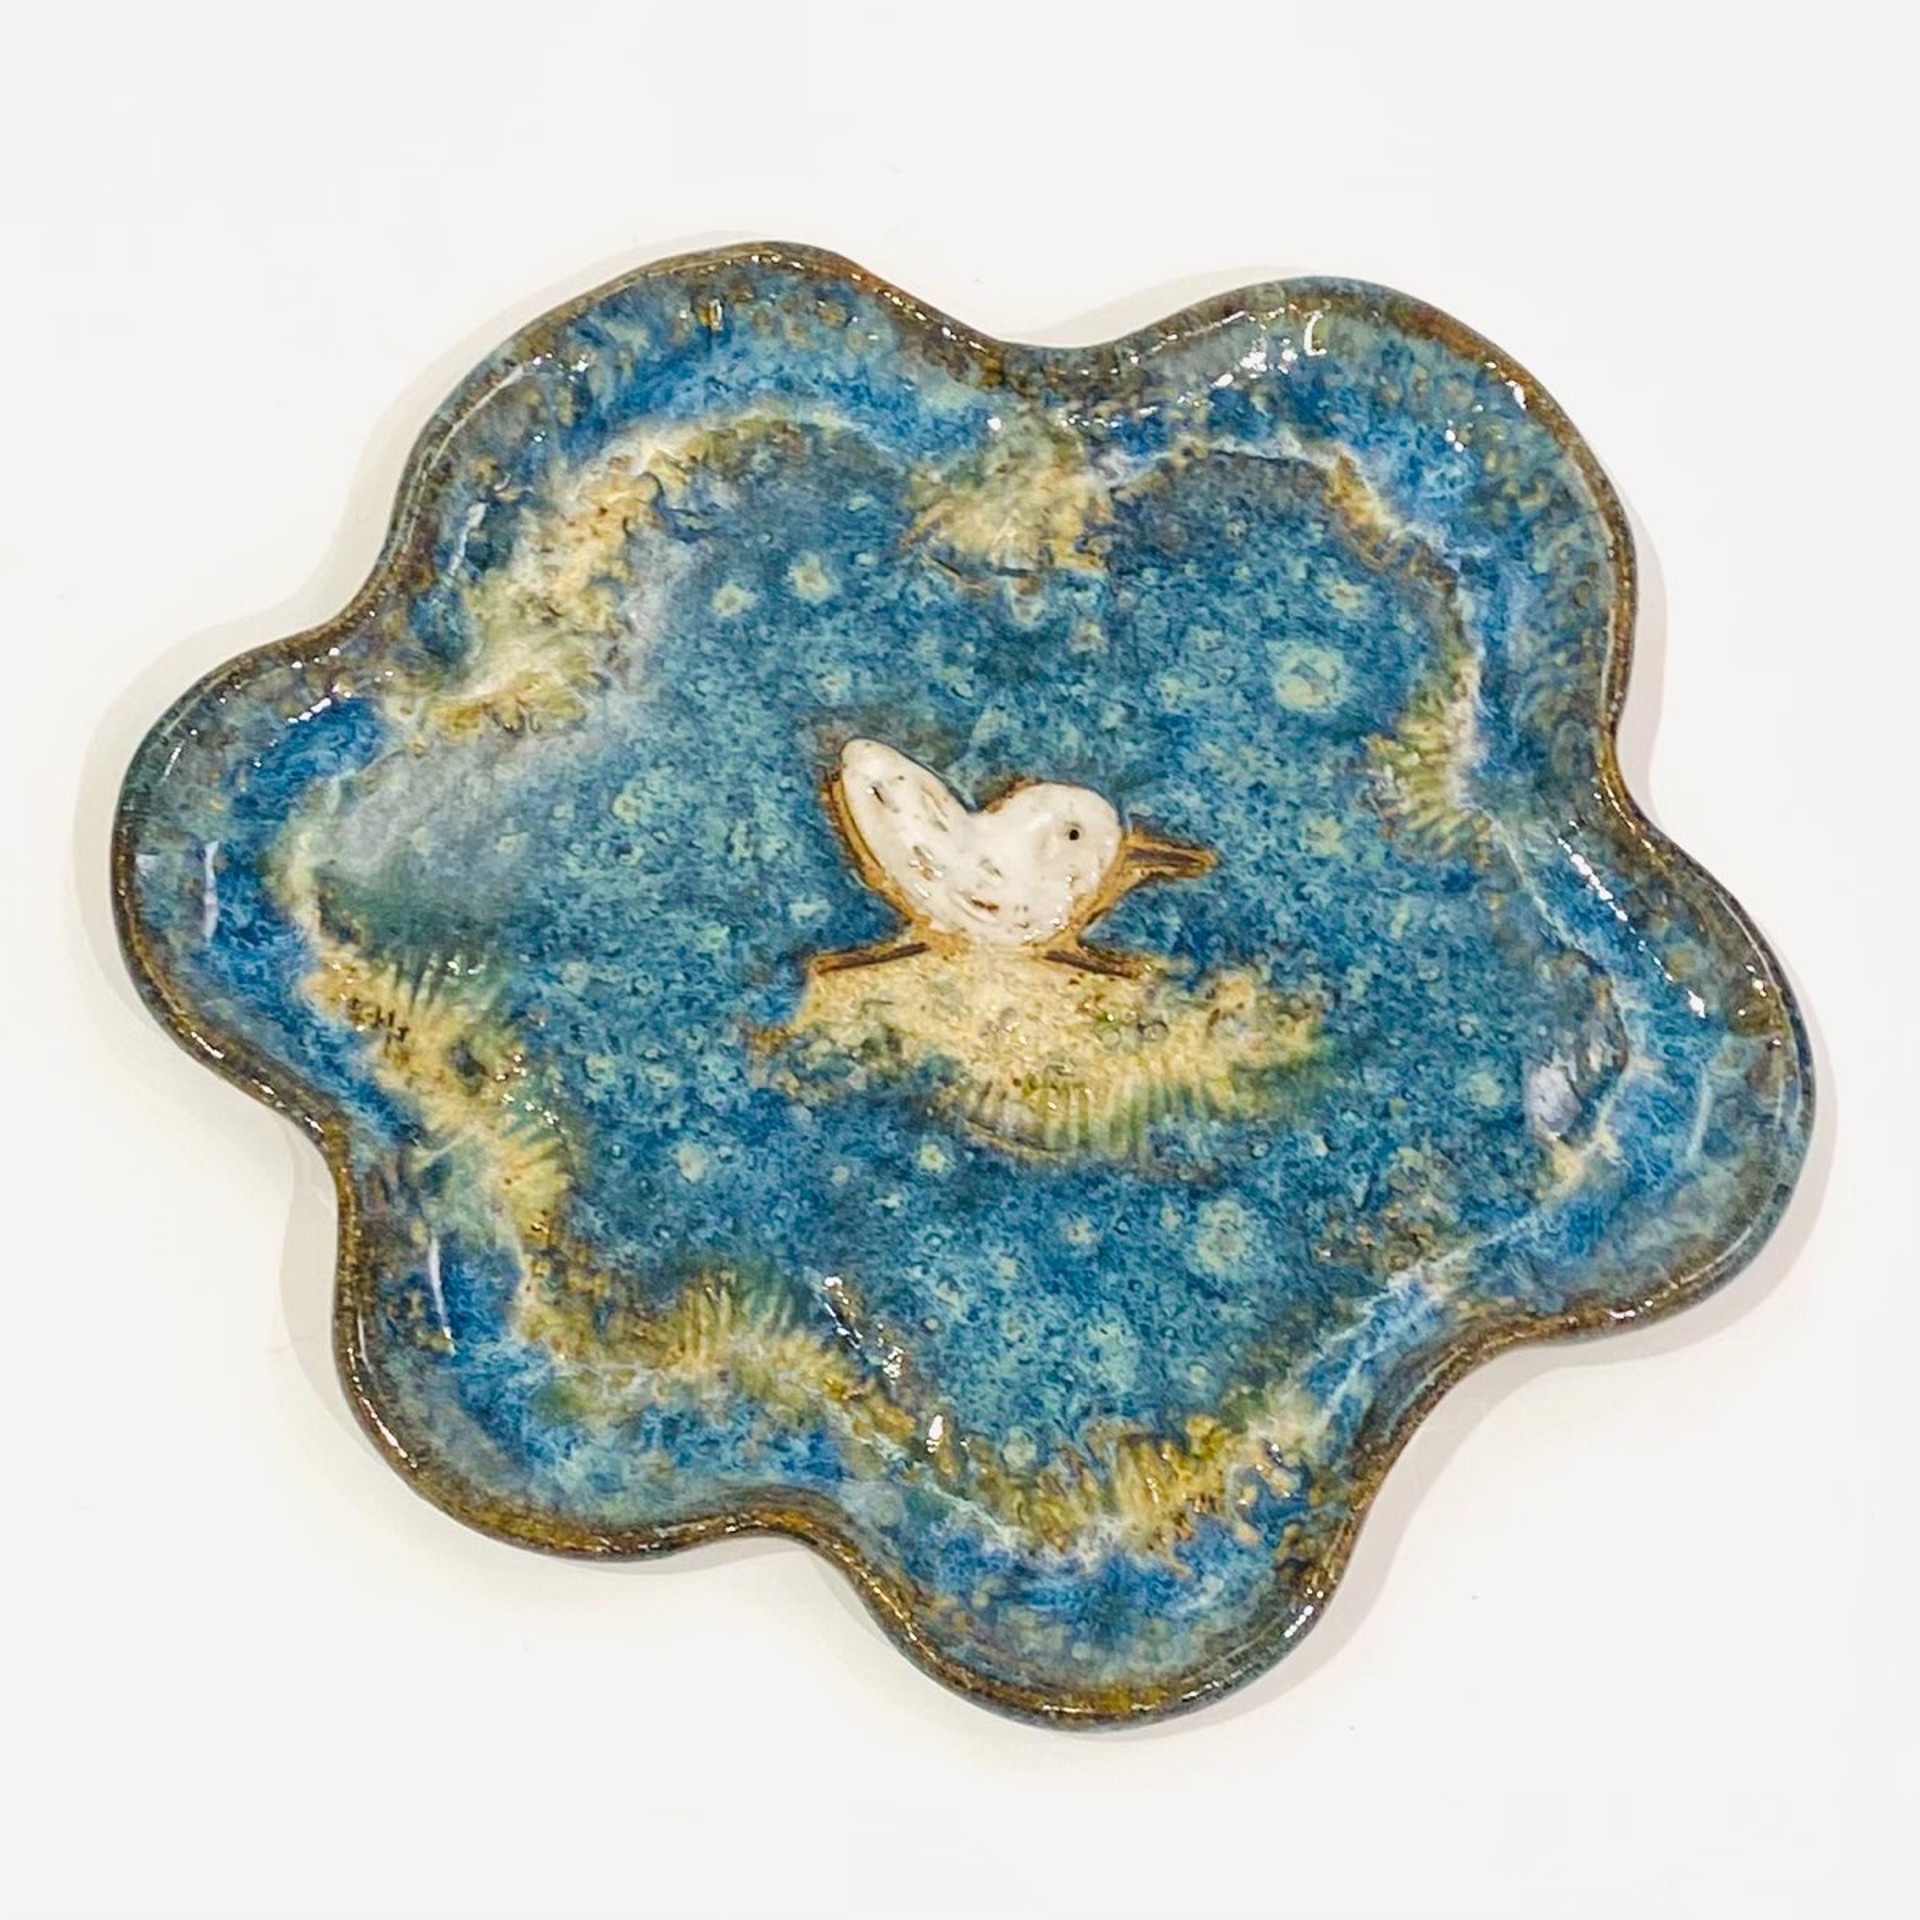 Small Plate with Sandpiper (Blue Glaze) by Jim & Steffi Logan